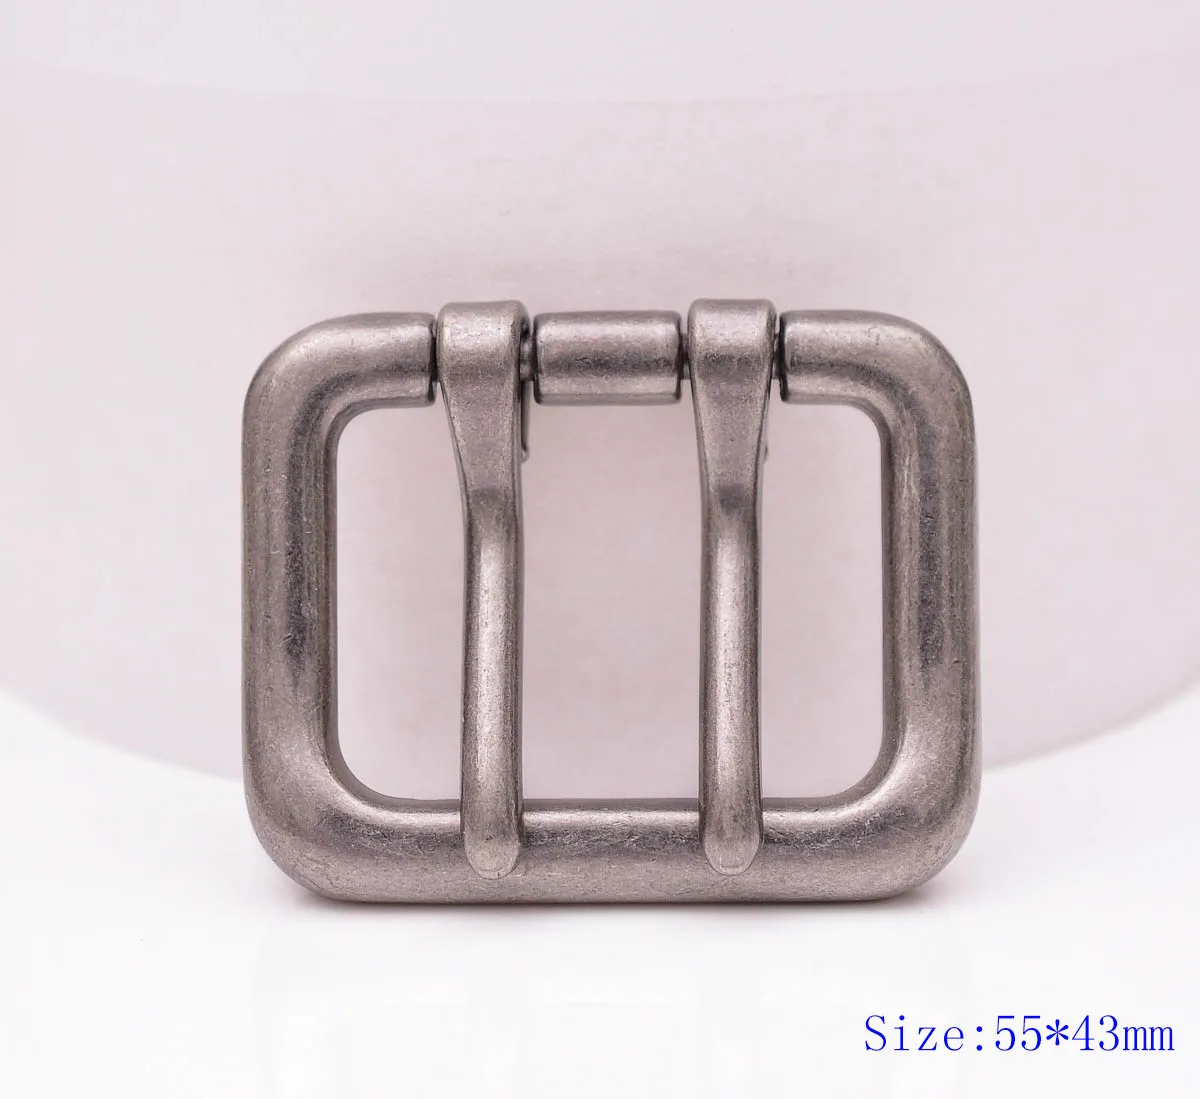 

55*43MM Me Silver Double Tongue Pin Prong DIY Metal Belt Buckle Fits 40MM Straps